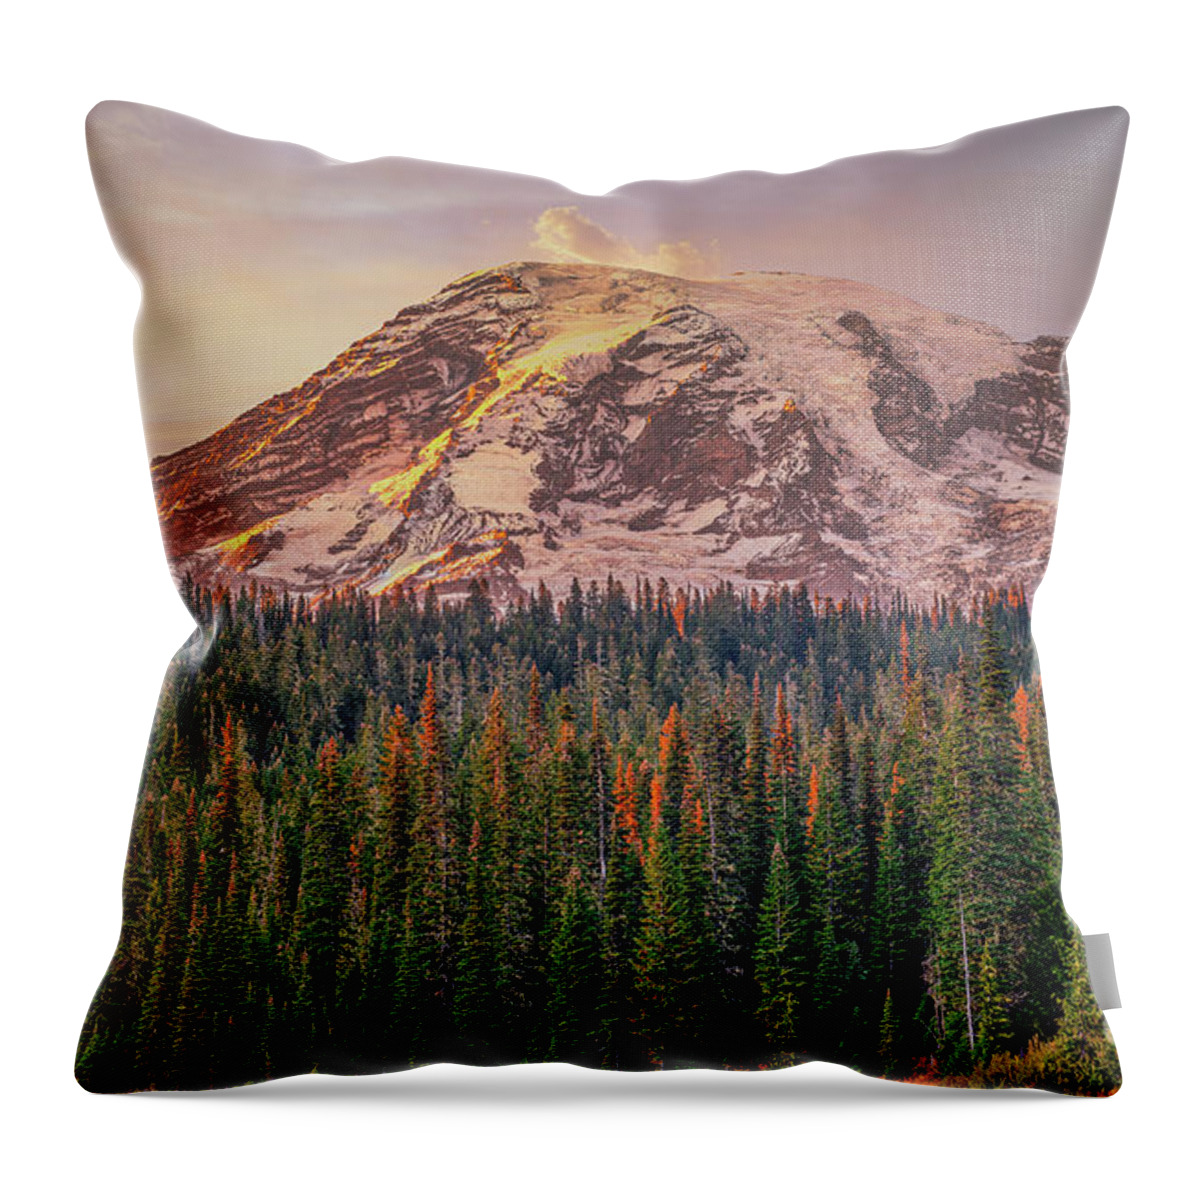 Sunset Throw Pillow featuring the photograph A Beautiful Sunset by Dheeraj Mutha